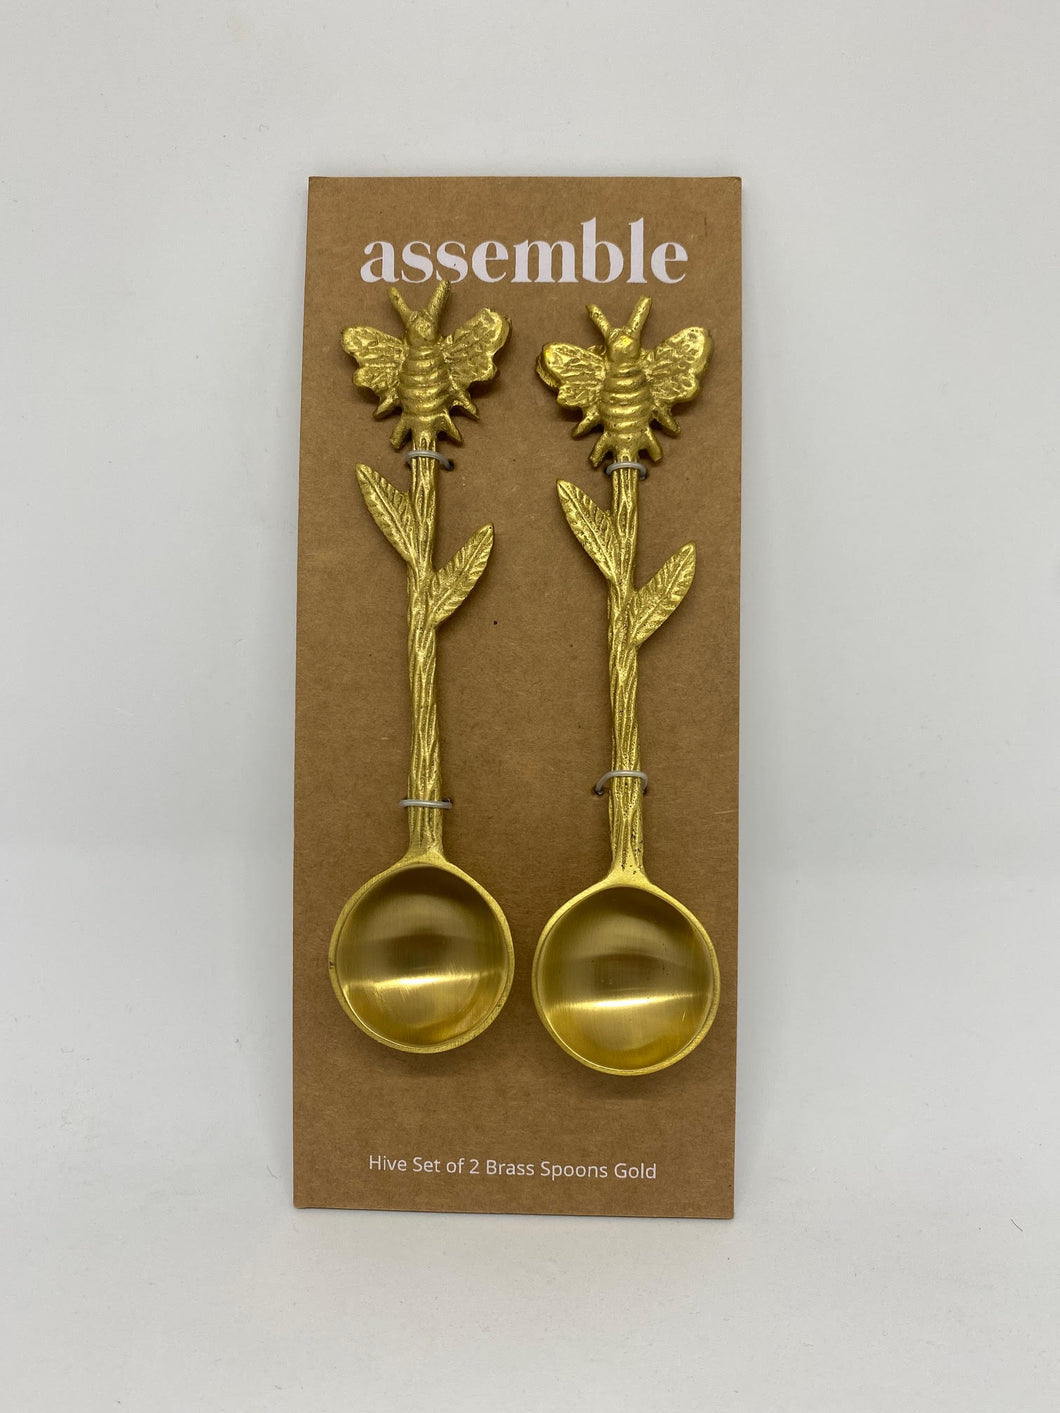 Hive Brass Spoons set of 2